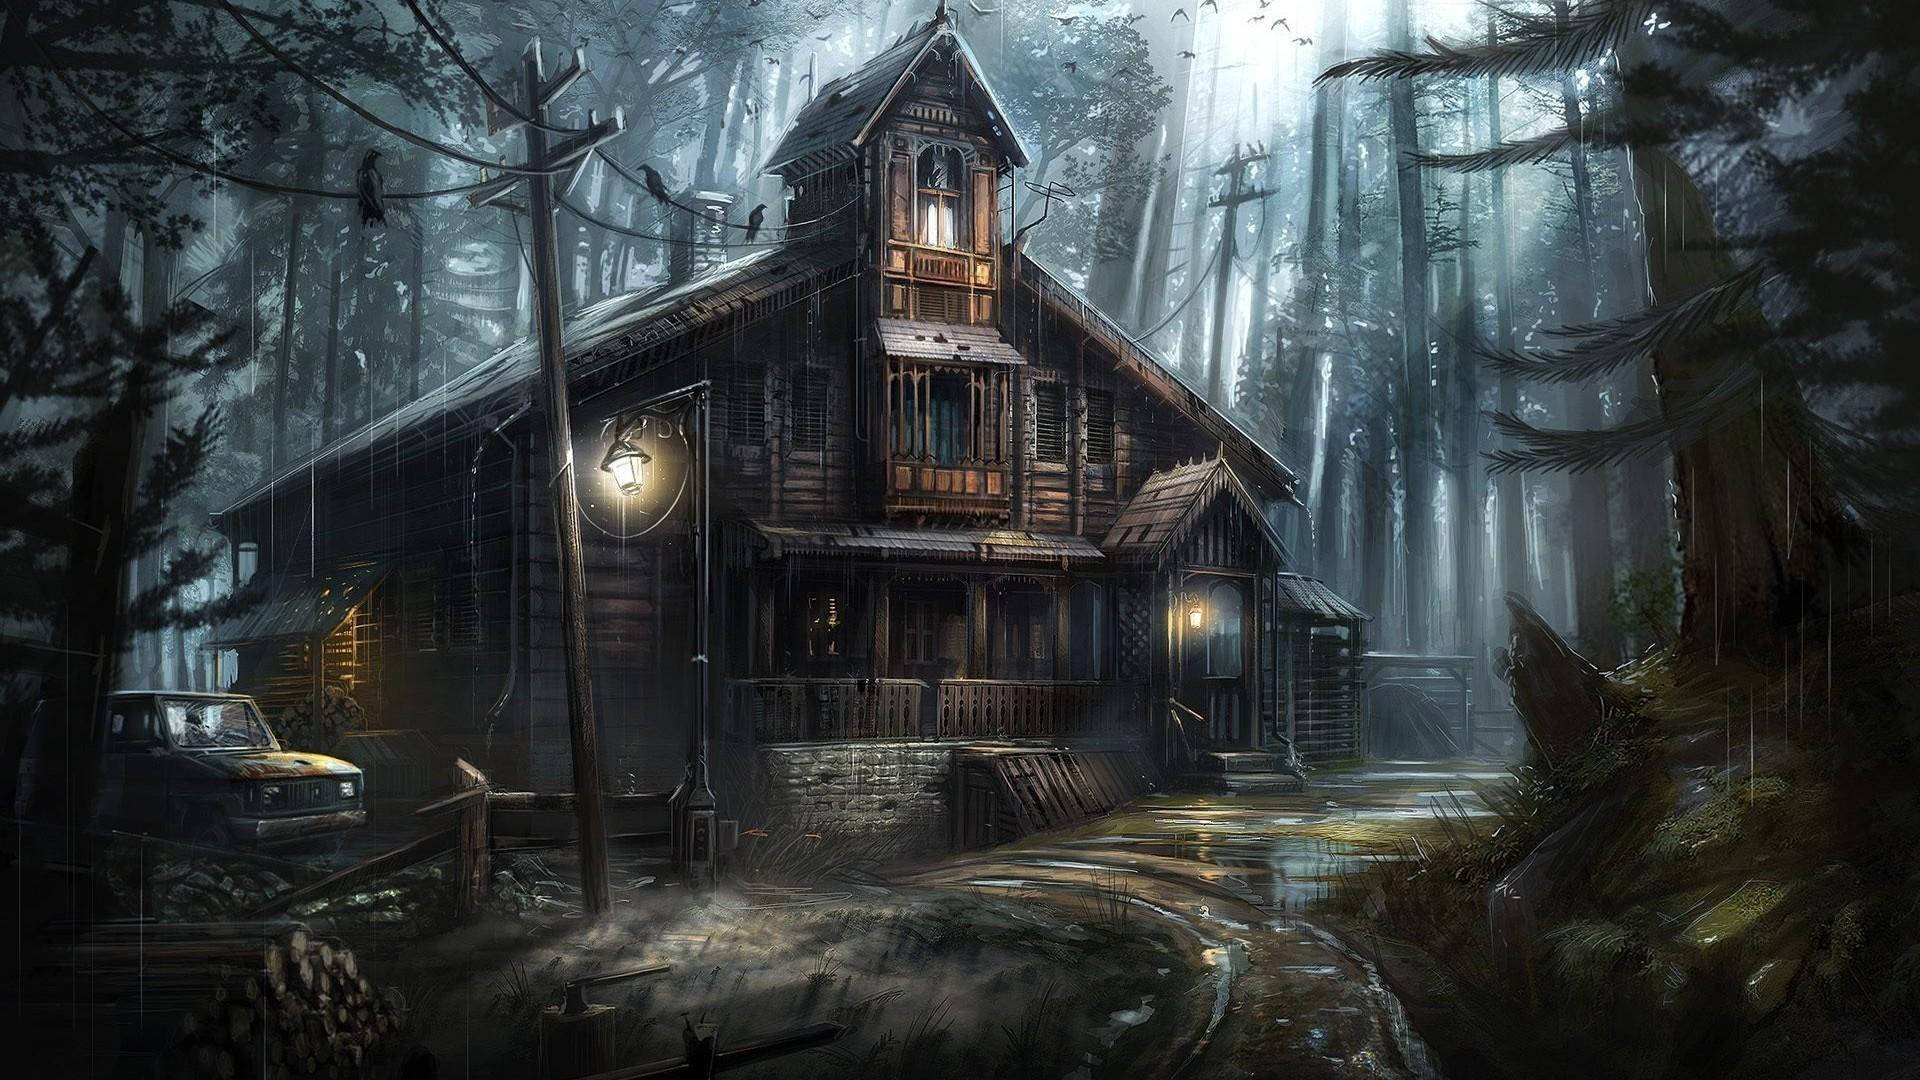 A spooky Haunted House awaits on Halloween night Wallpaper